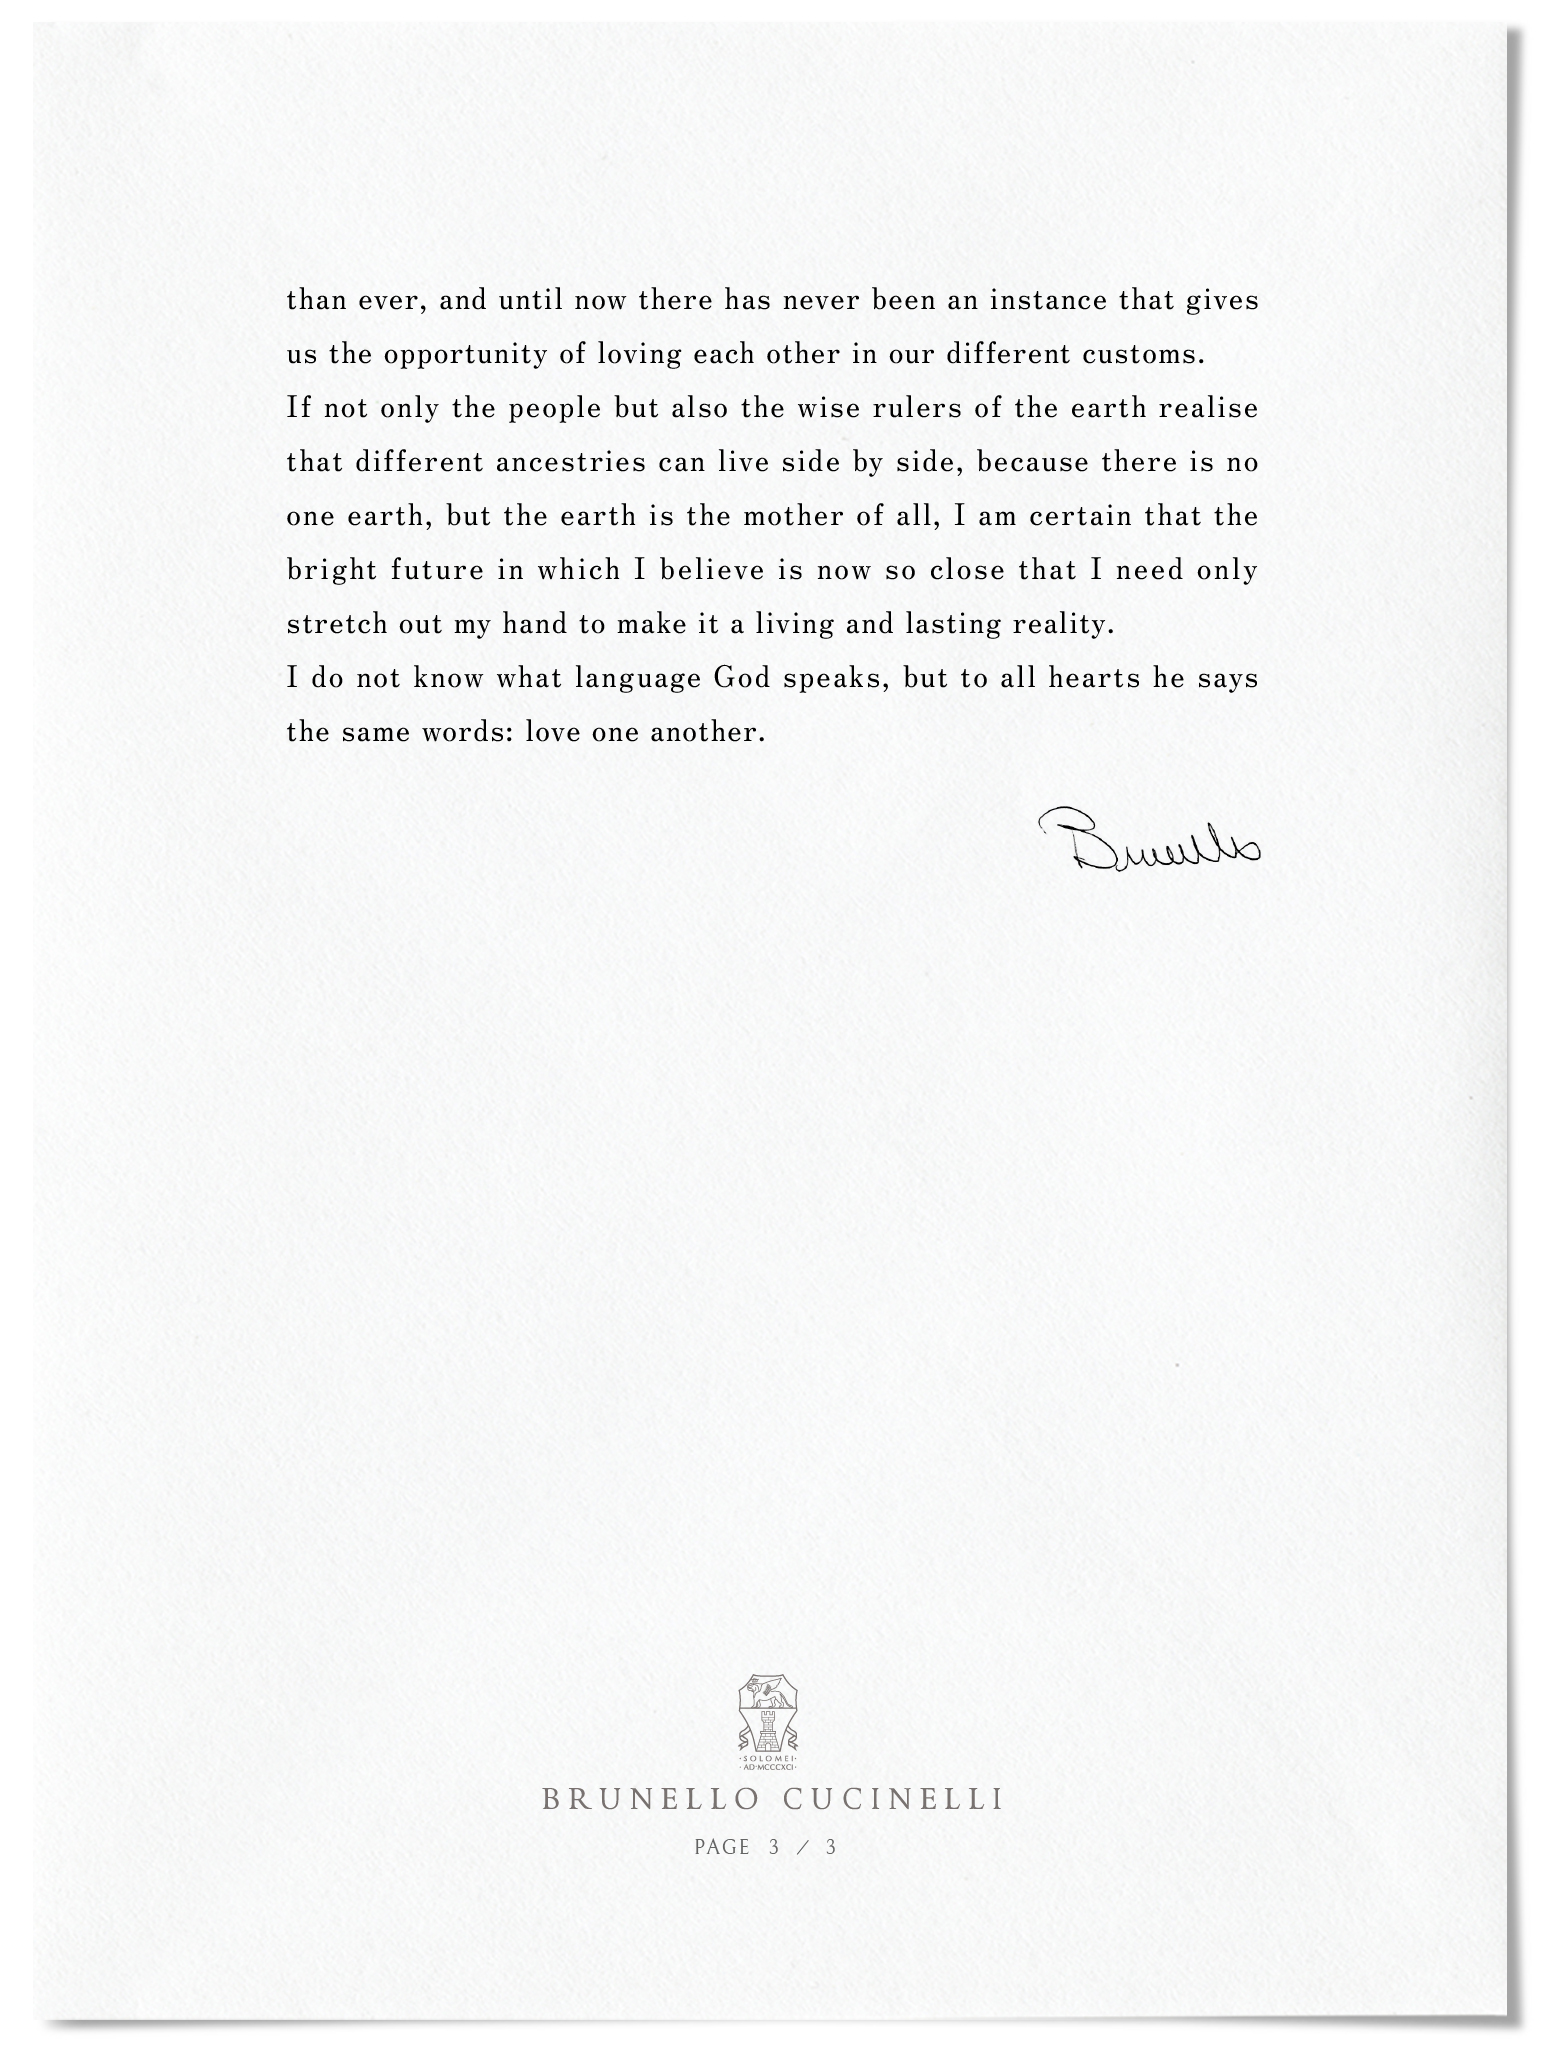 LETTERS from BRUNELLO CUCINELLI